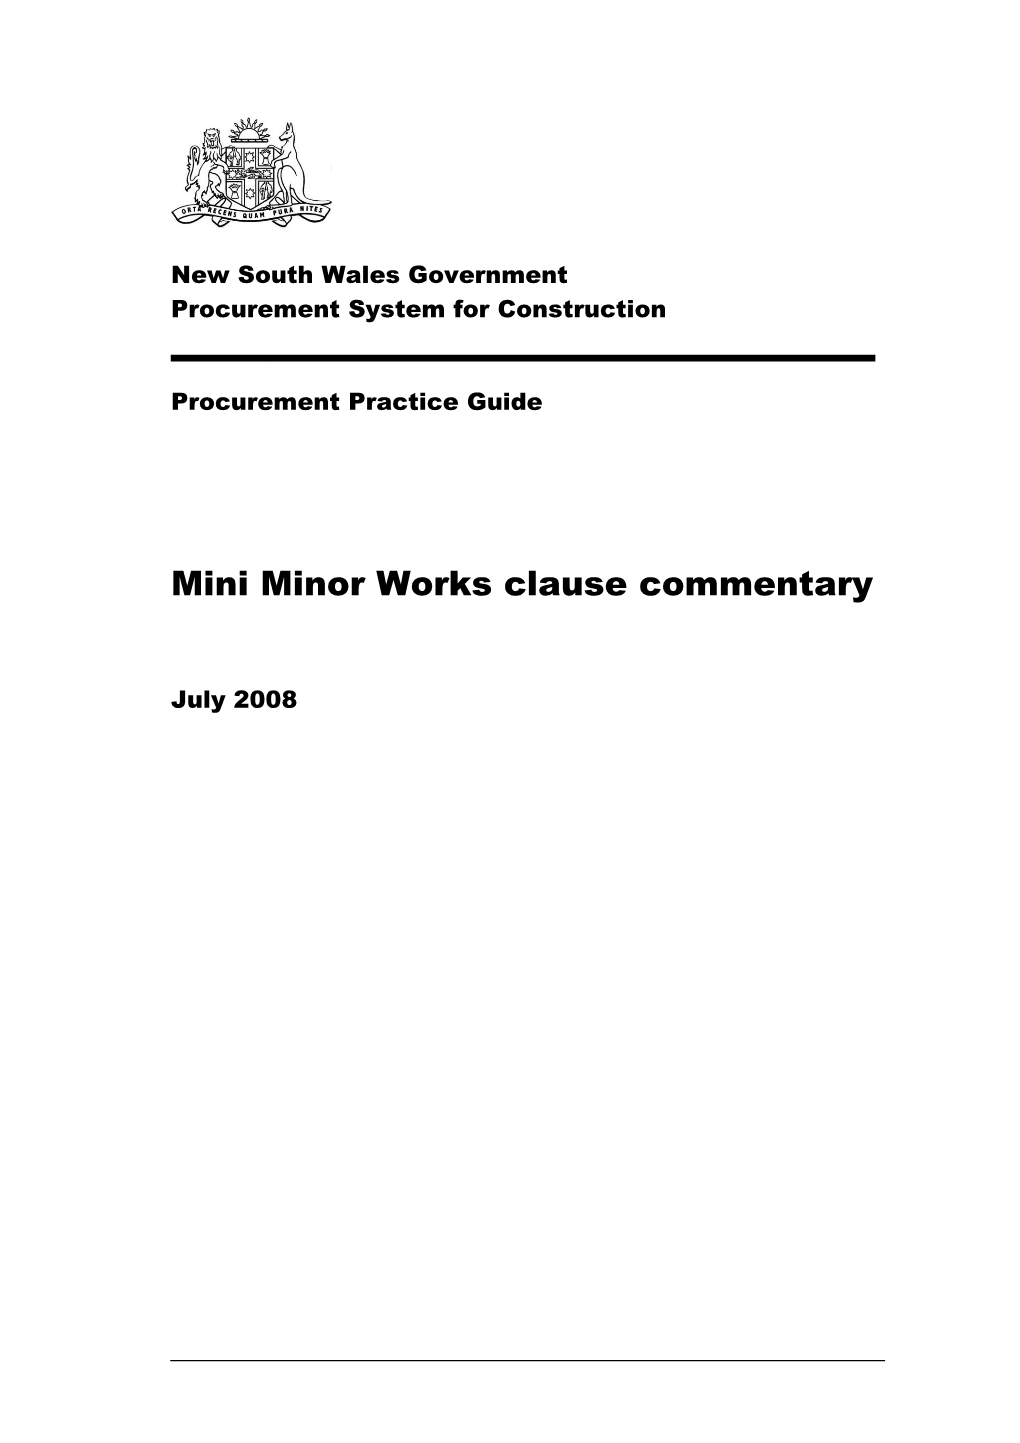 Mini Minor Works Clause Commentary